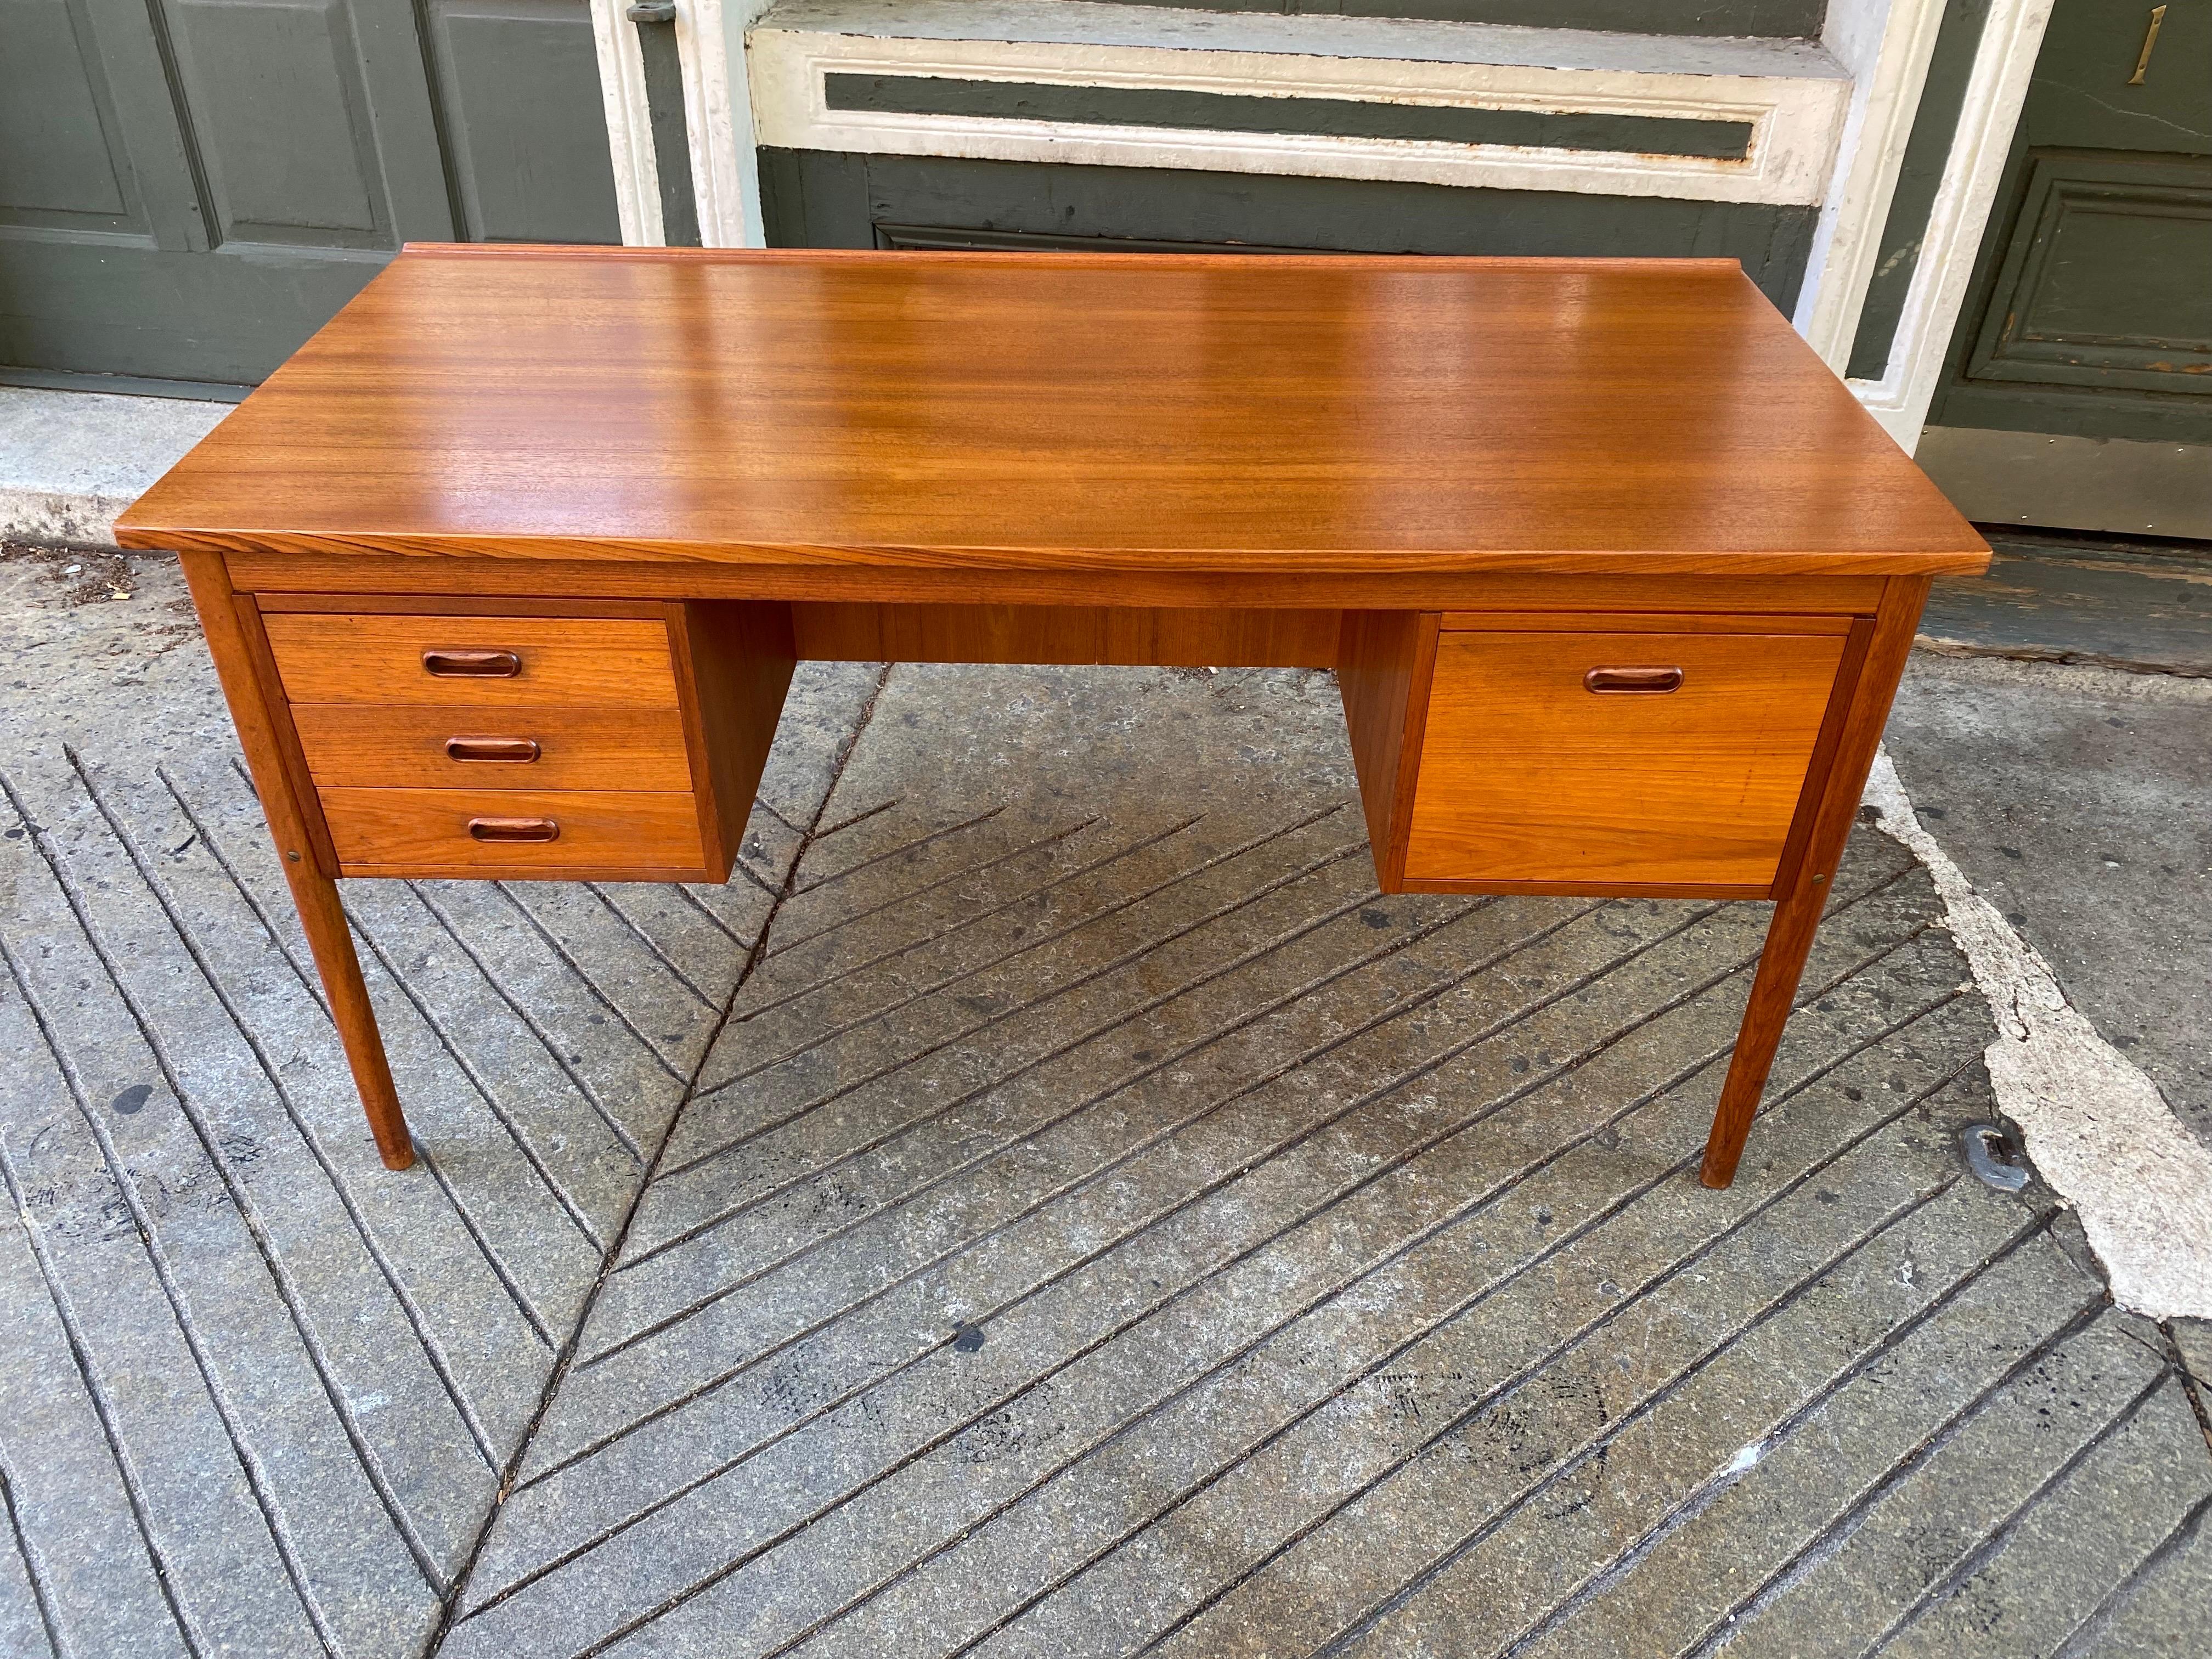 Danish Teak Desk with a Front Bookcase. Top refinished and overall very clean condition! Nice design with bookcase in front makes this a perfect desk for the center of the room! 3 smaller drawers on left and one deep drawer on right. Space between